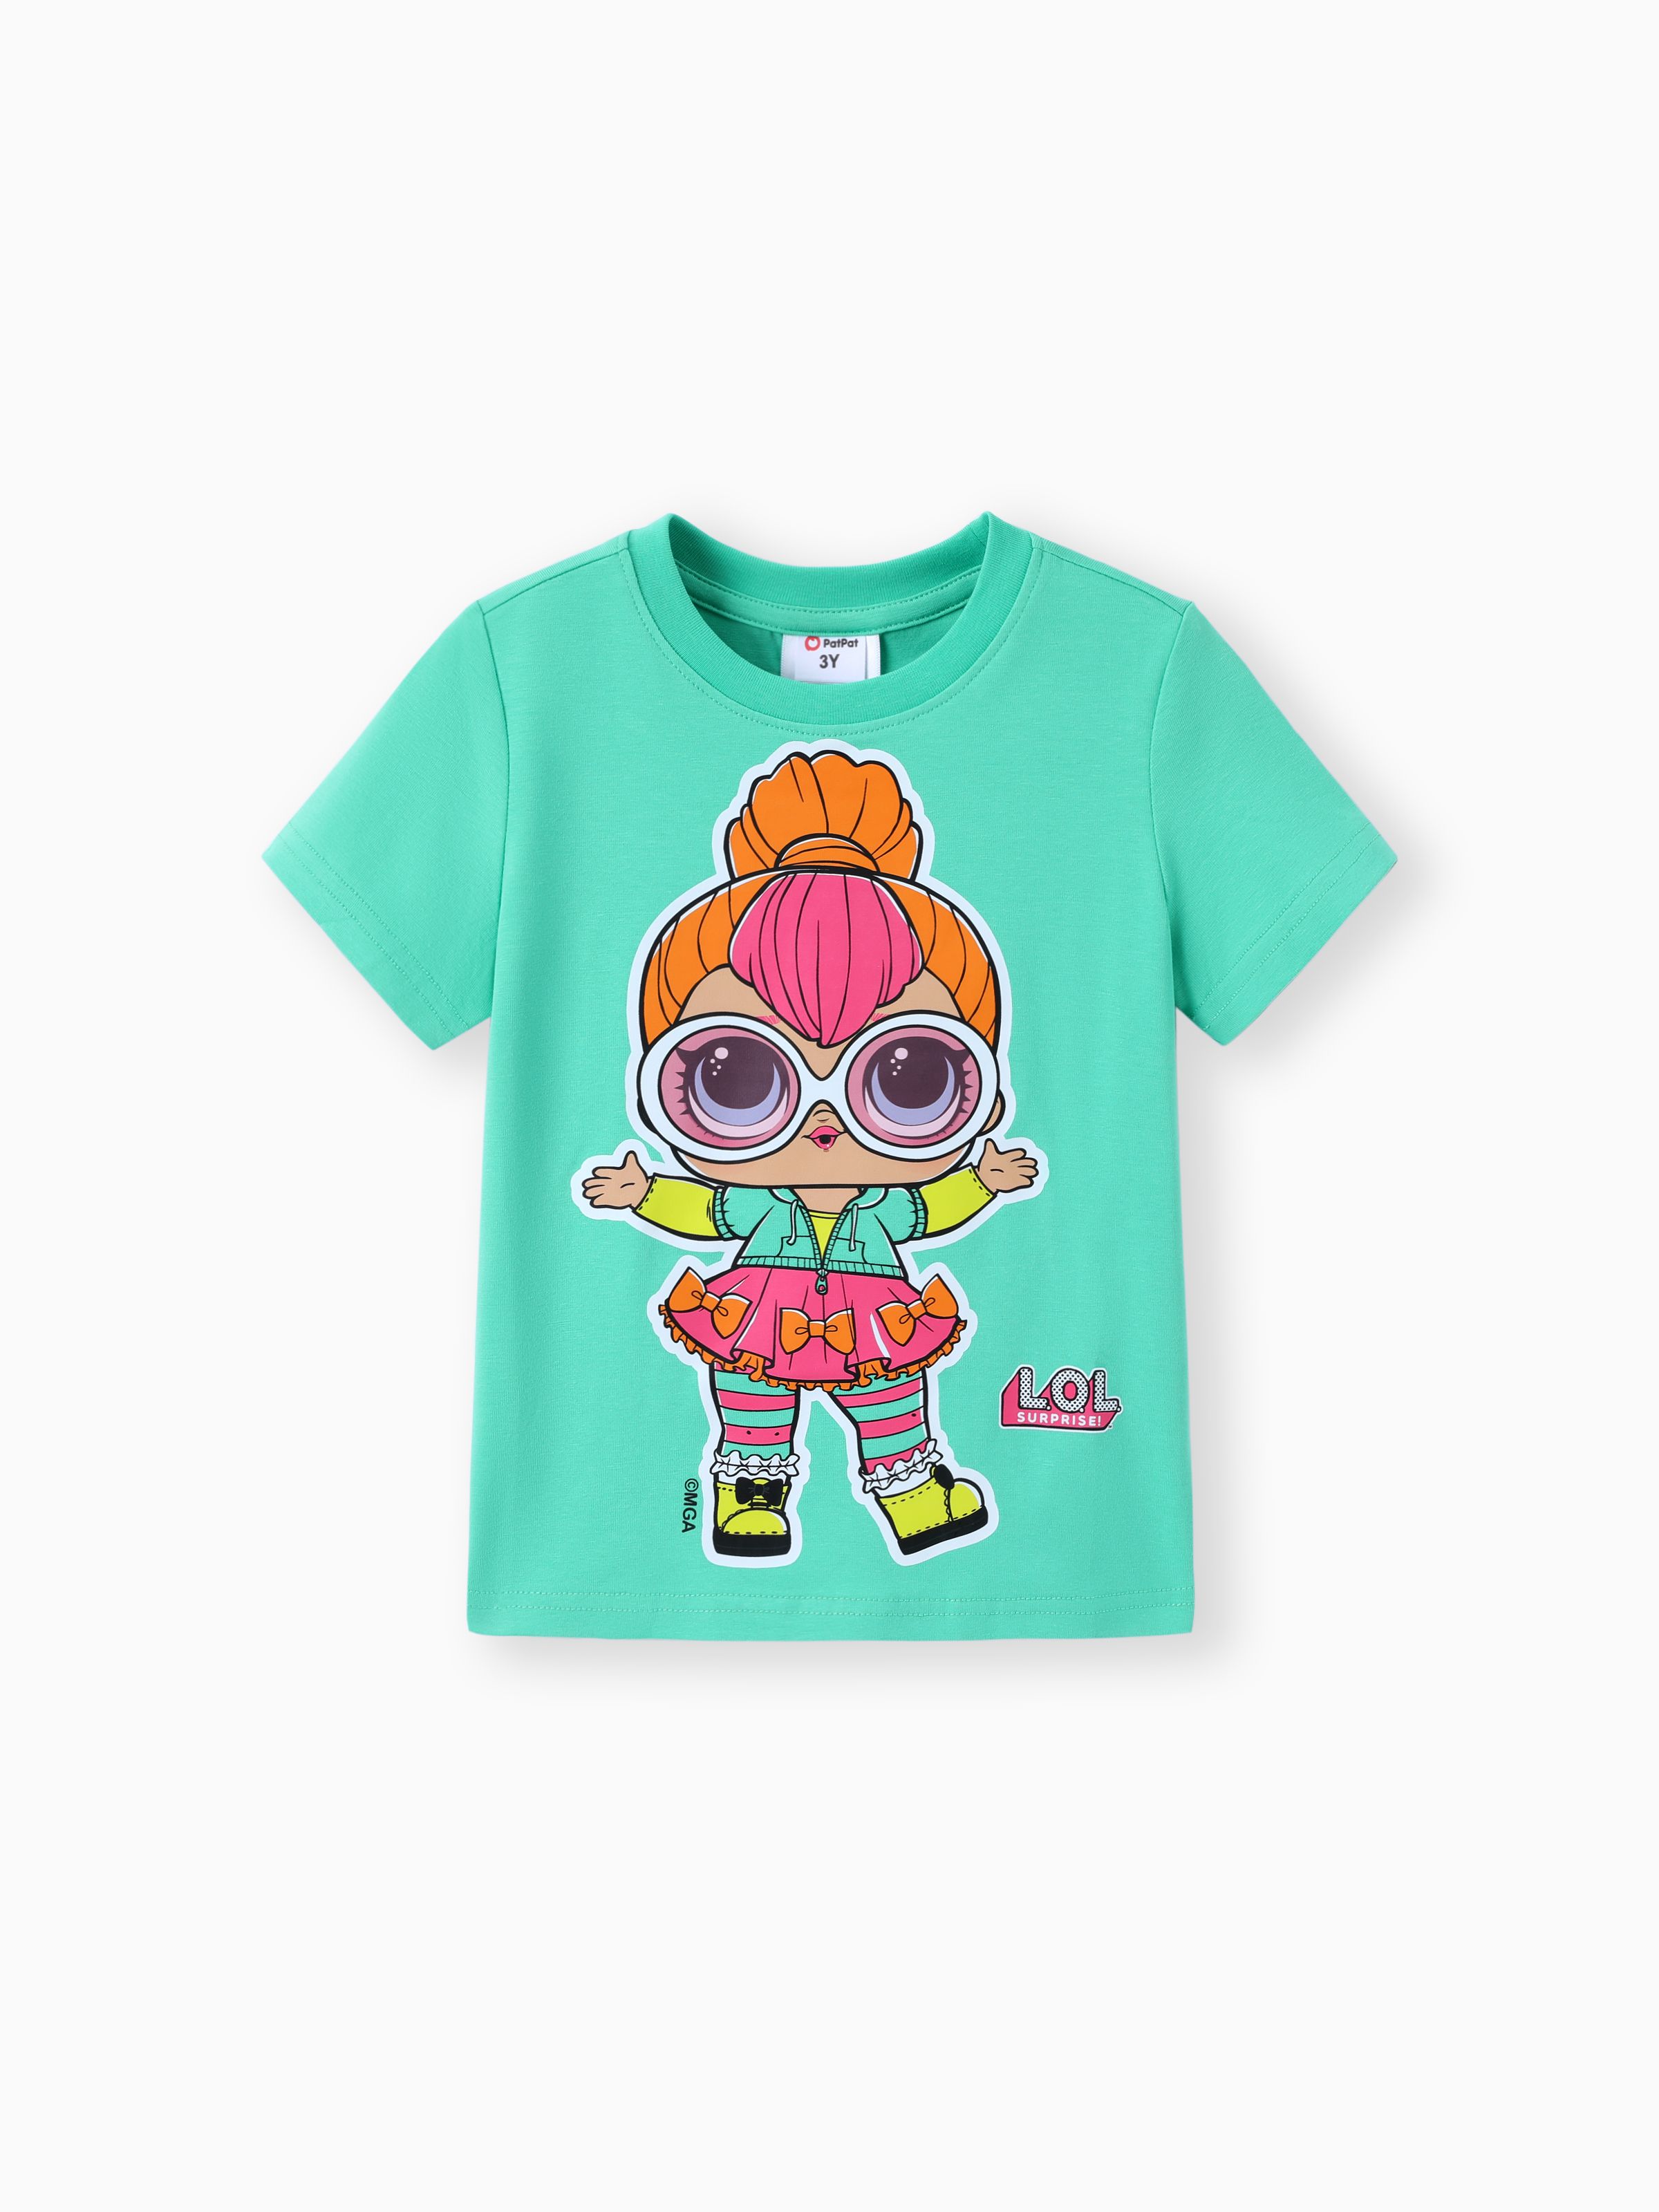 

L.O.L. SURPRISE! Toddler/Kid Girl Cotton Character Print Short-sleeveTee